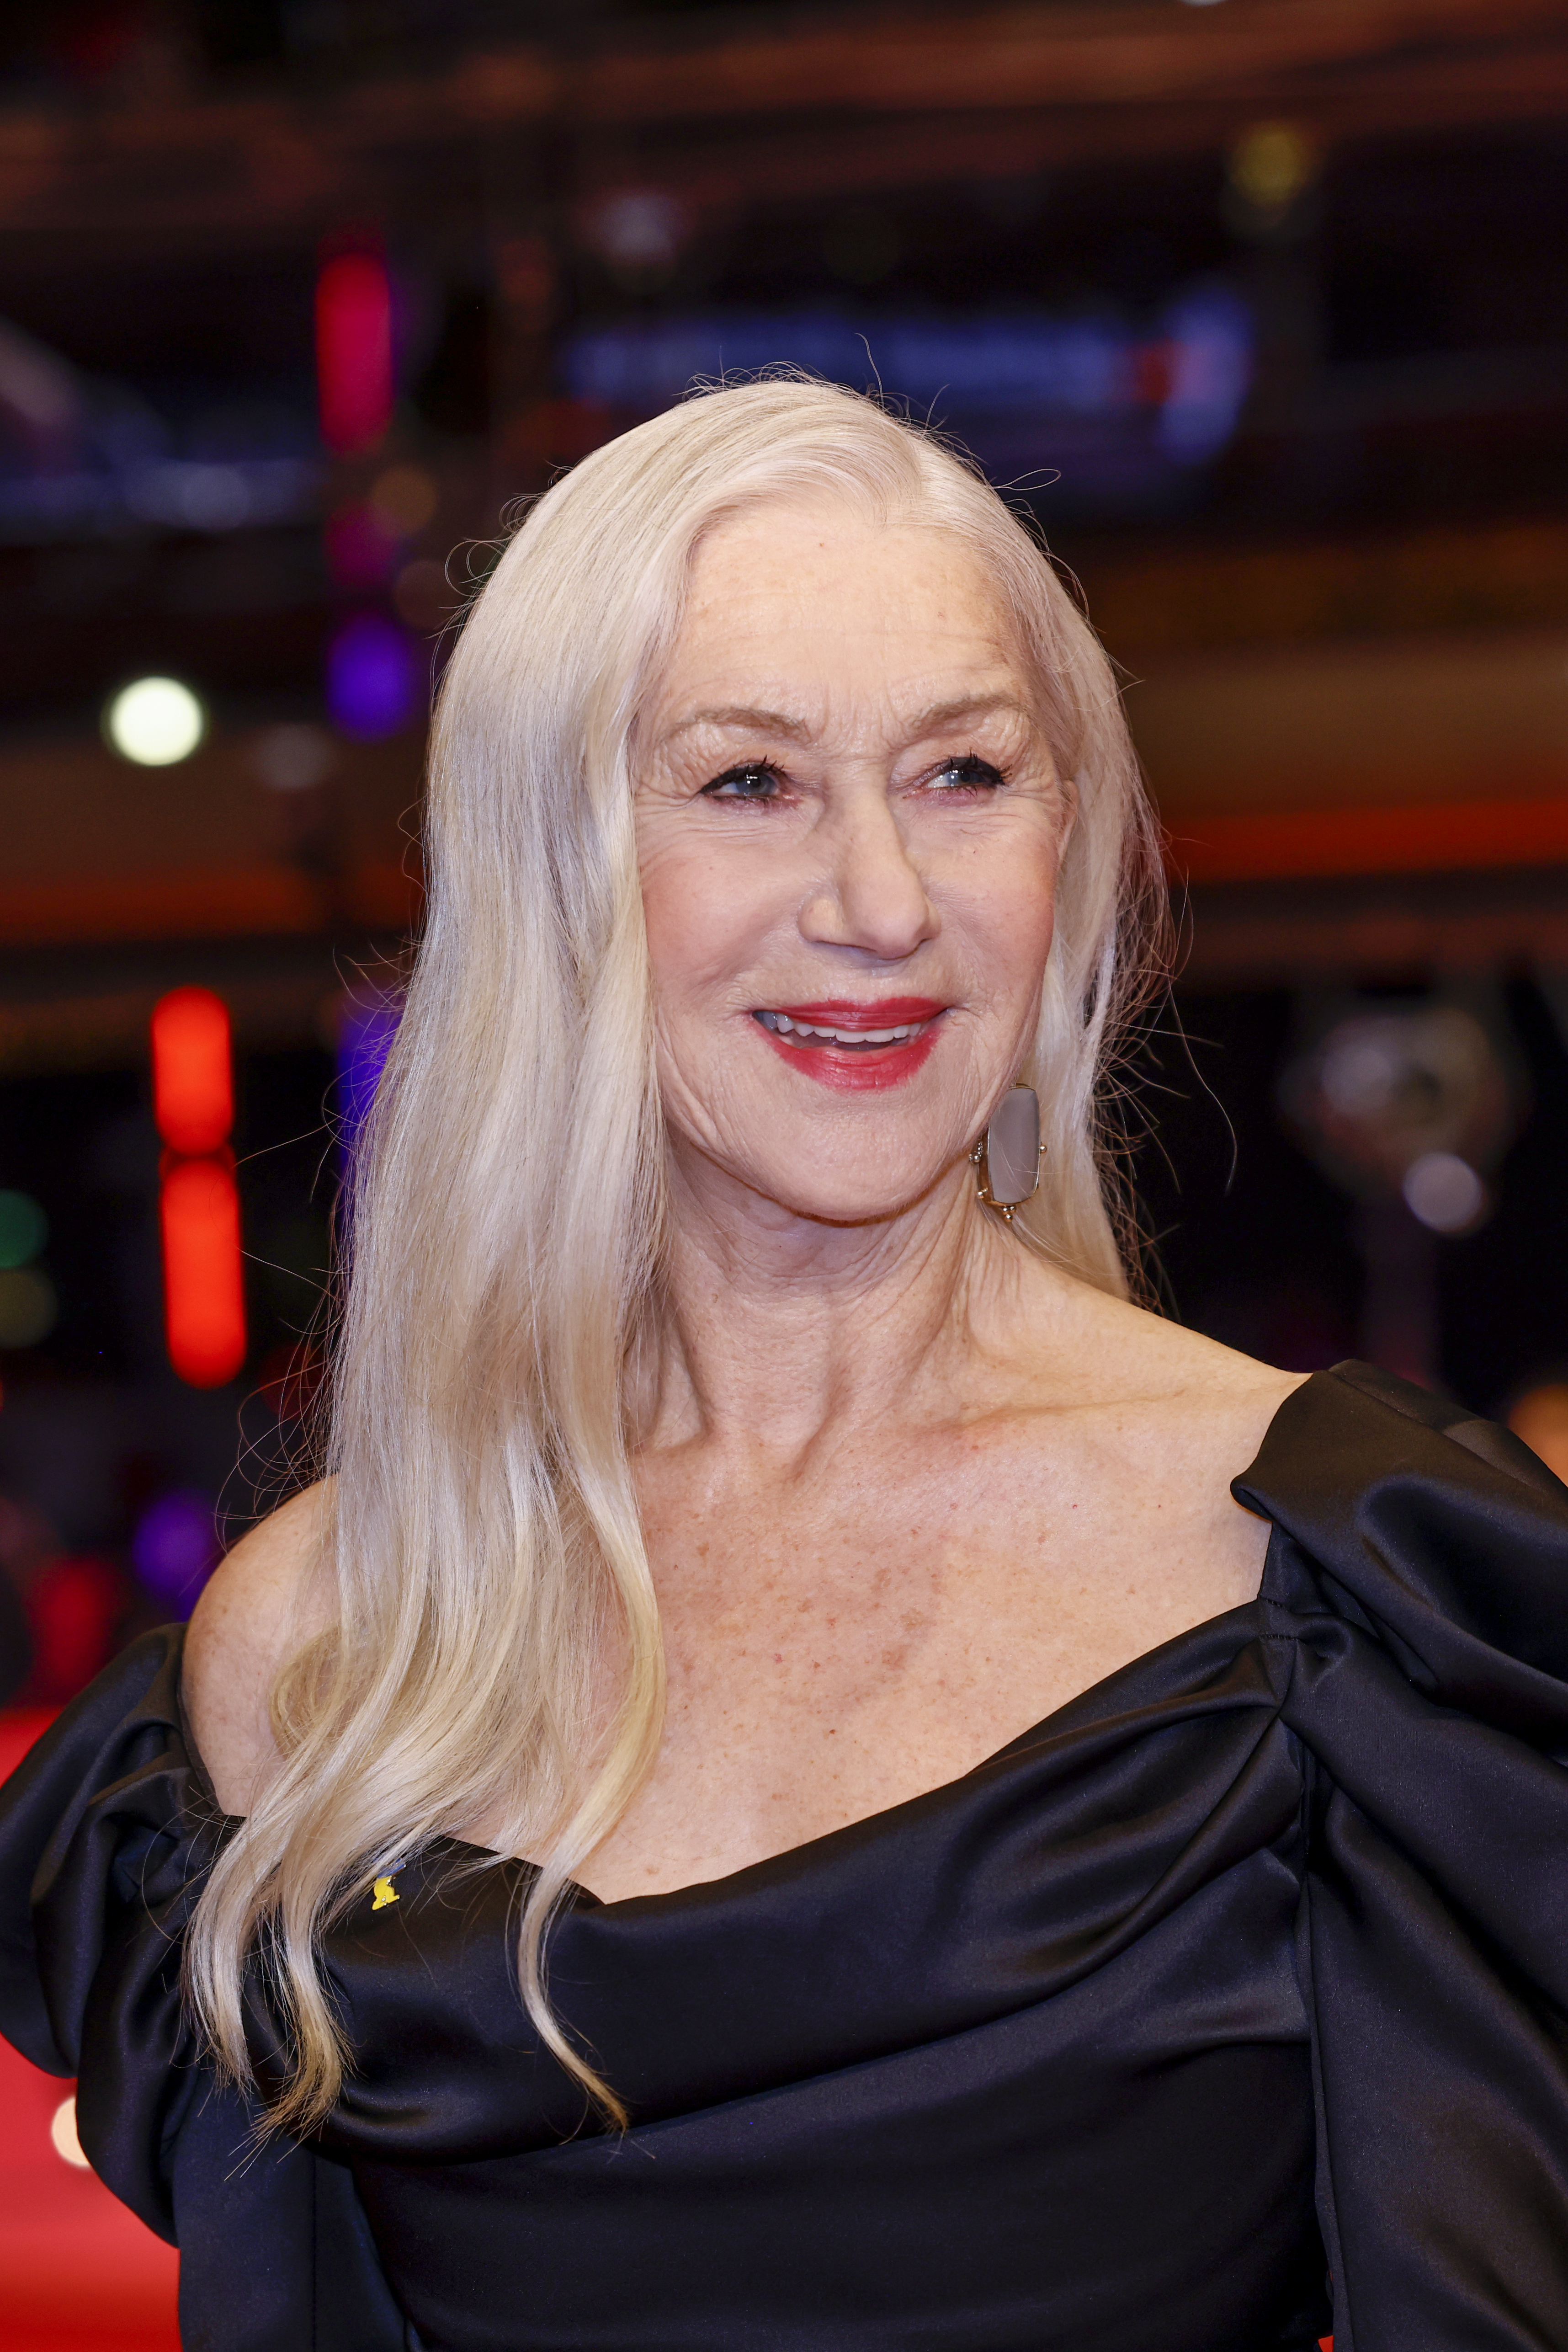 Helen Mirren at the "Golda" premiere and European Shooting Stars 2023 red carpet on February 20, 2023 in Berlin, Germany. | Source: Getty Images